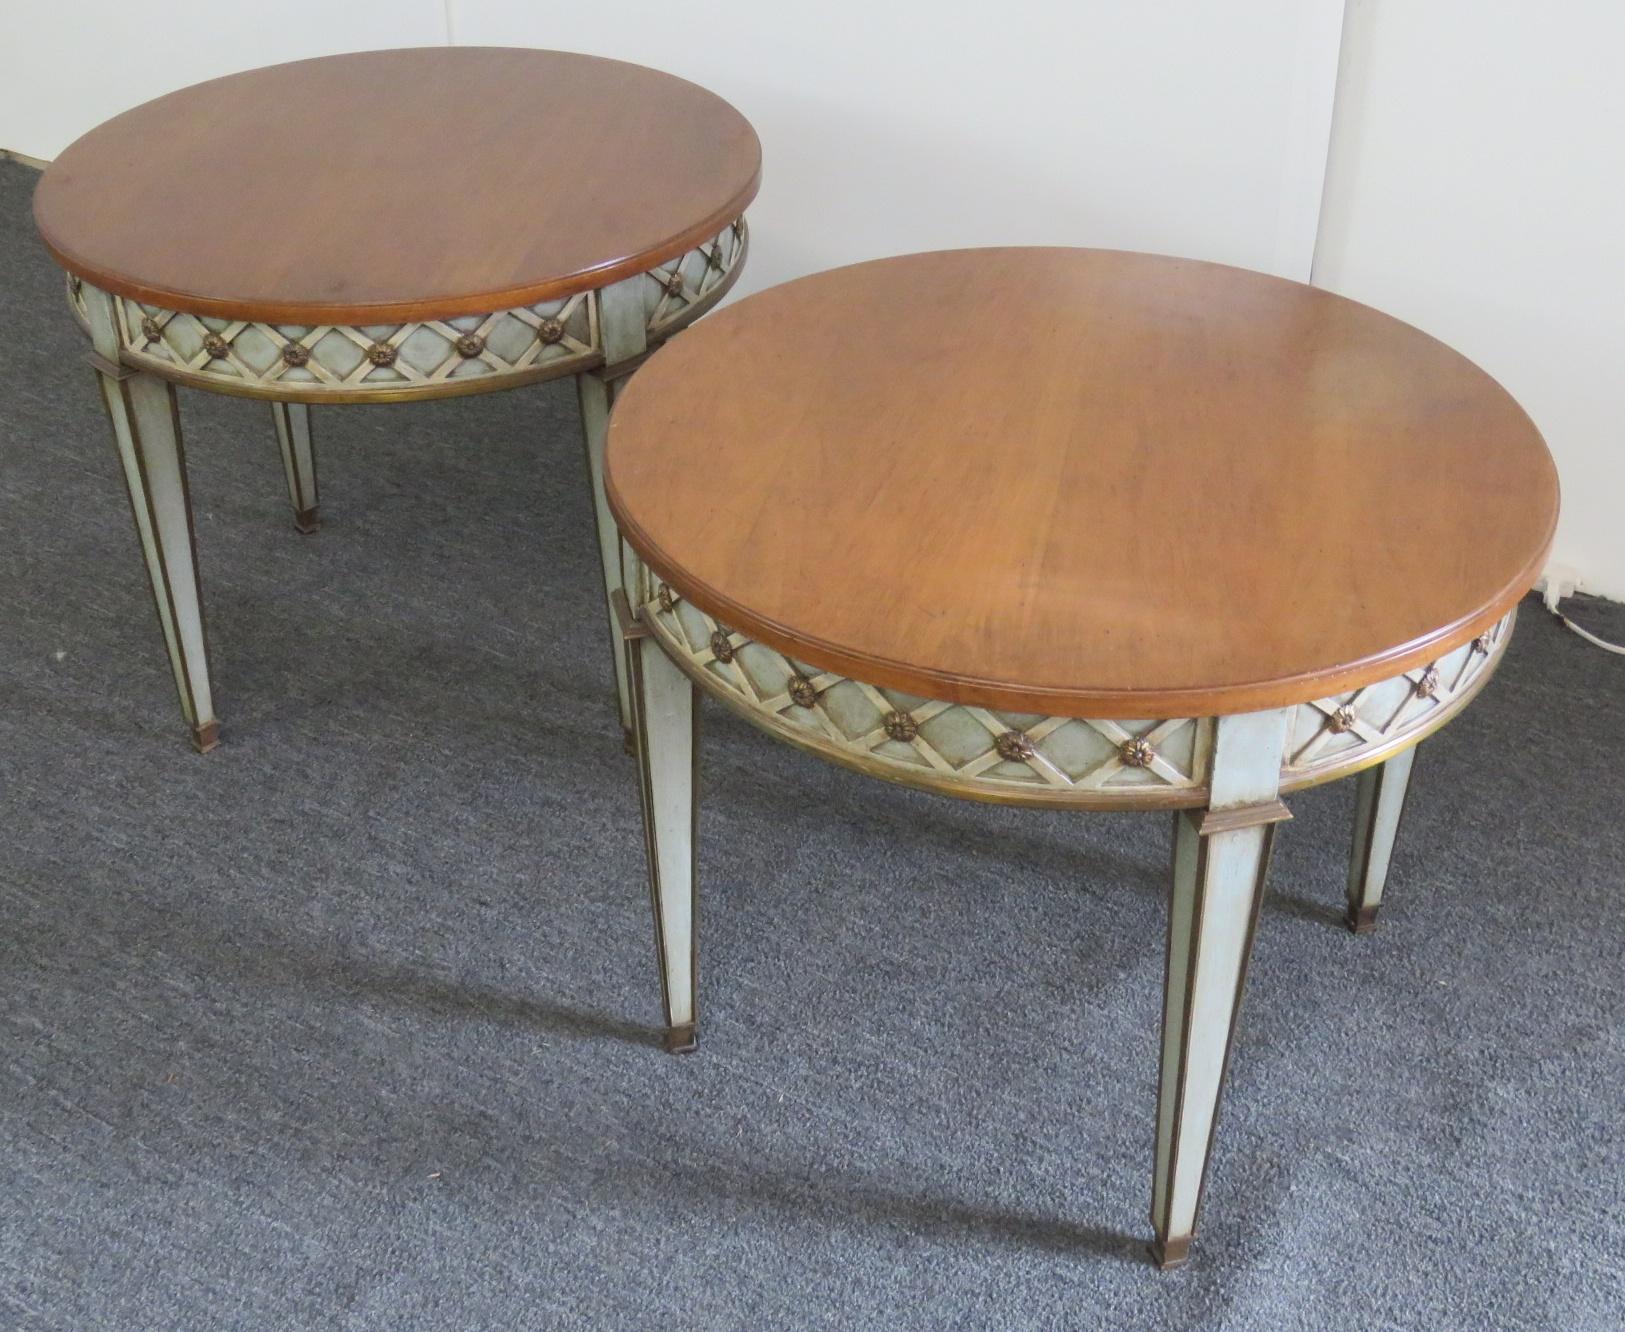 Pair of Regency style distressed paint decorated side tables by Trouvailles of Watertown, Mass. These are in good condition and have finely carved frames and a beautiful color combination.